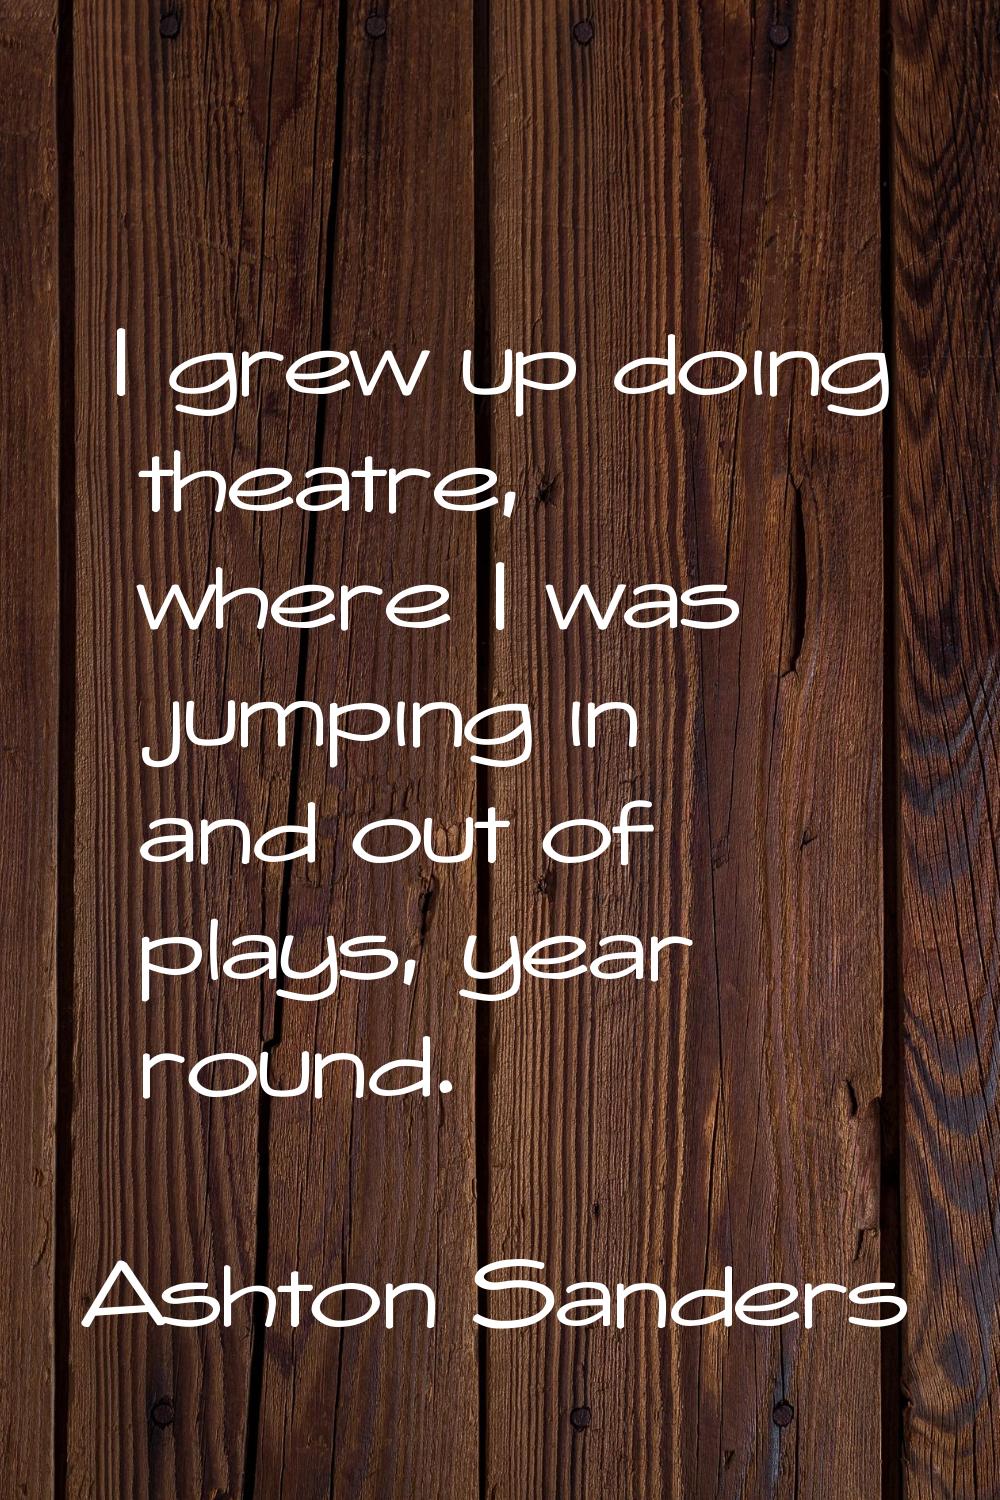 I grew up doing theatre, where I was jumping in and out of plays, year round.